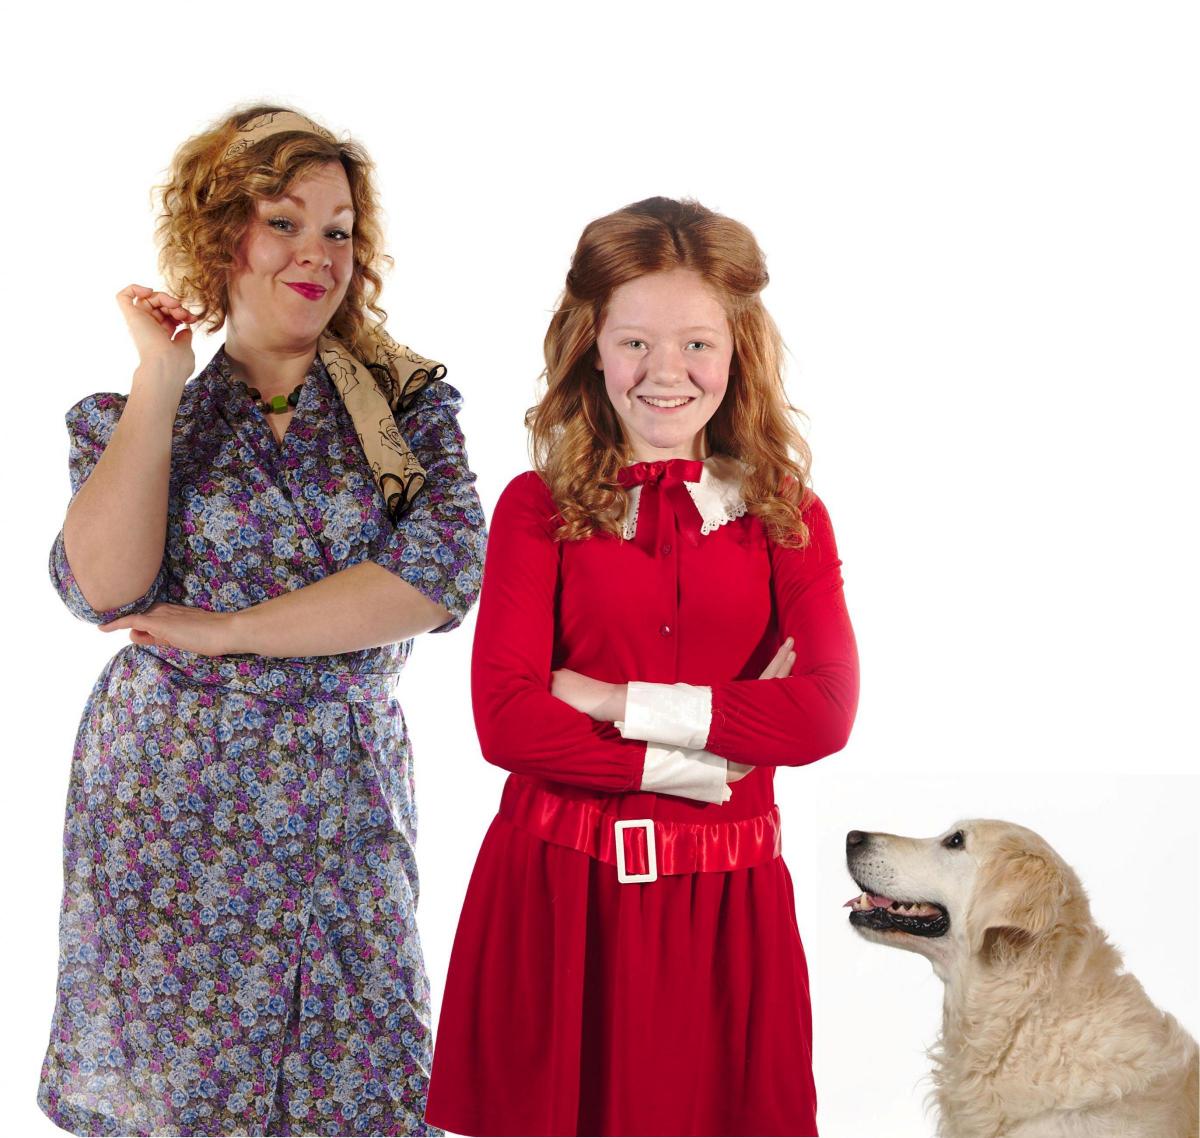 Kinver Light Operatic Society to stage Annie | Worcester News